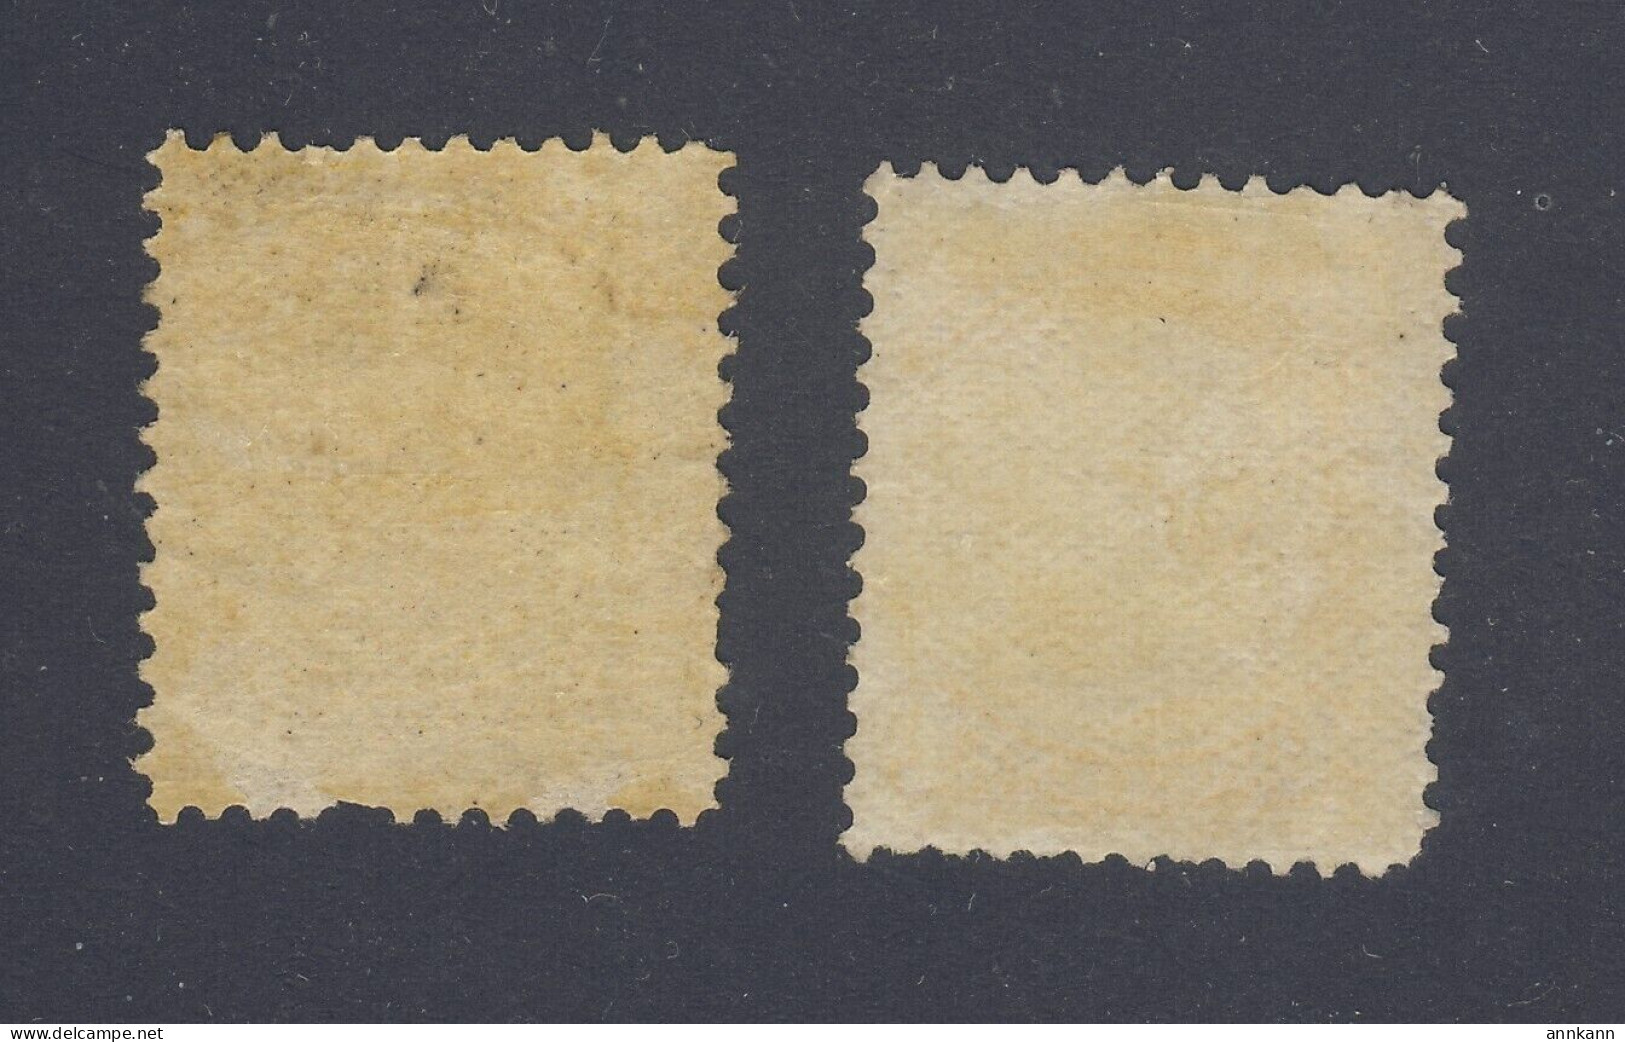 2x Canada Small Queen Mint Stamps #35-1c Fine #35i-1c VF Guide Value = $120.00 - Unused Stamps